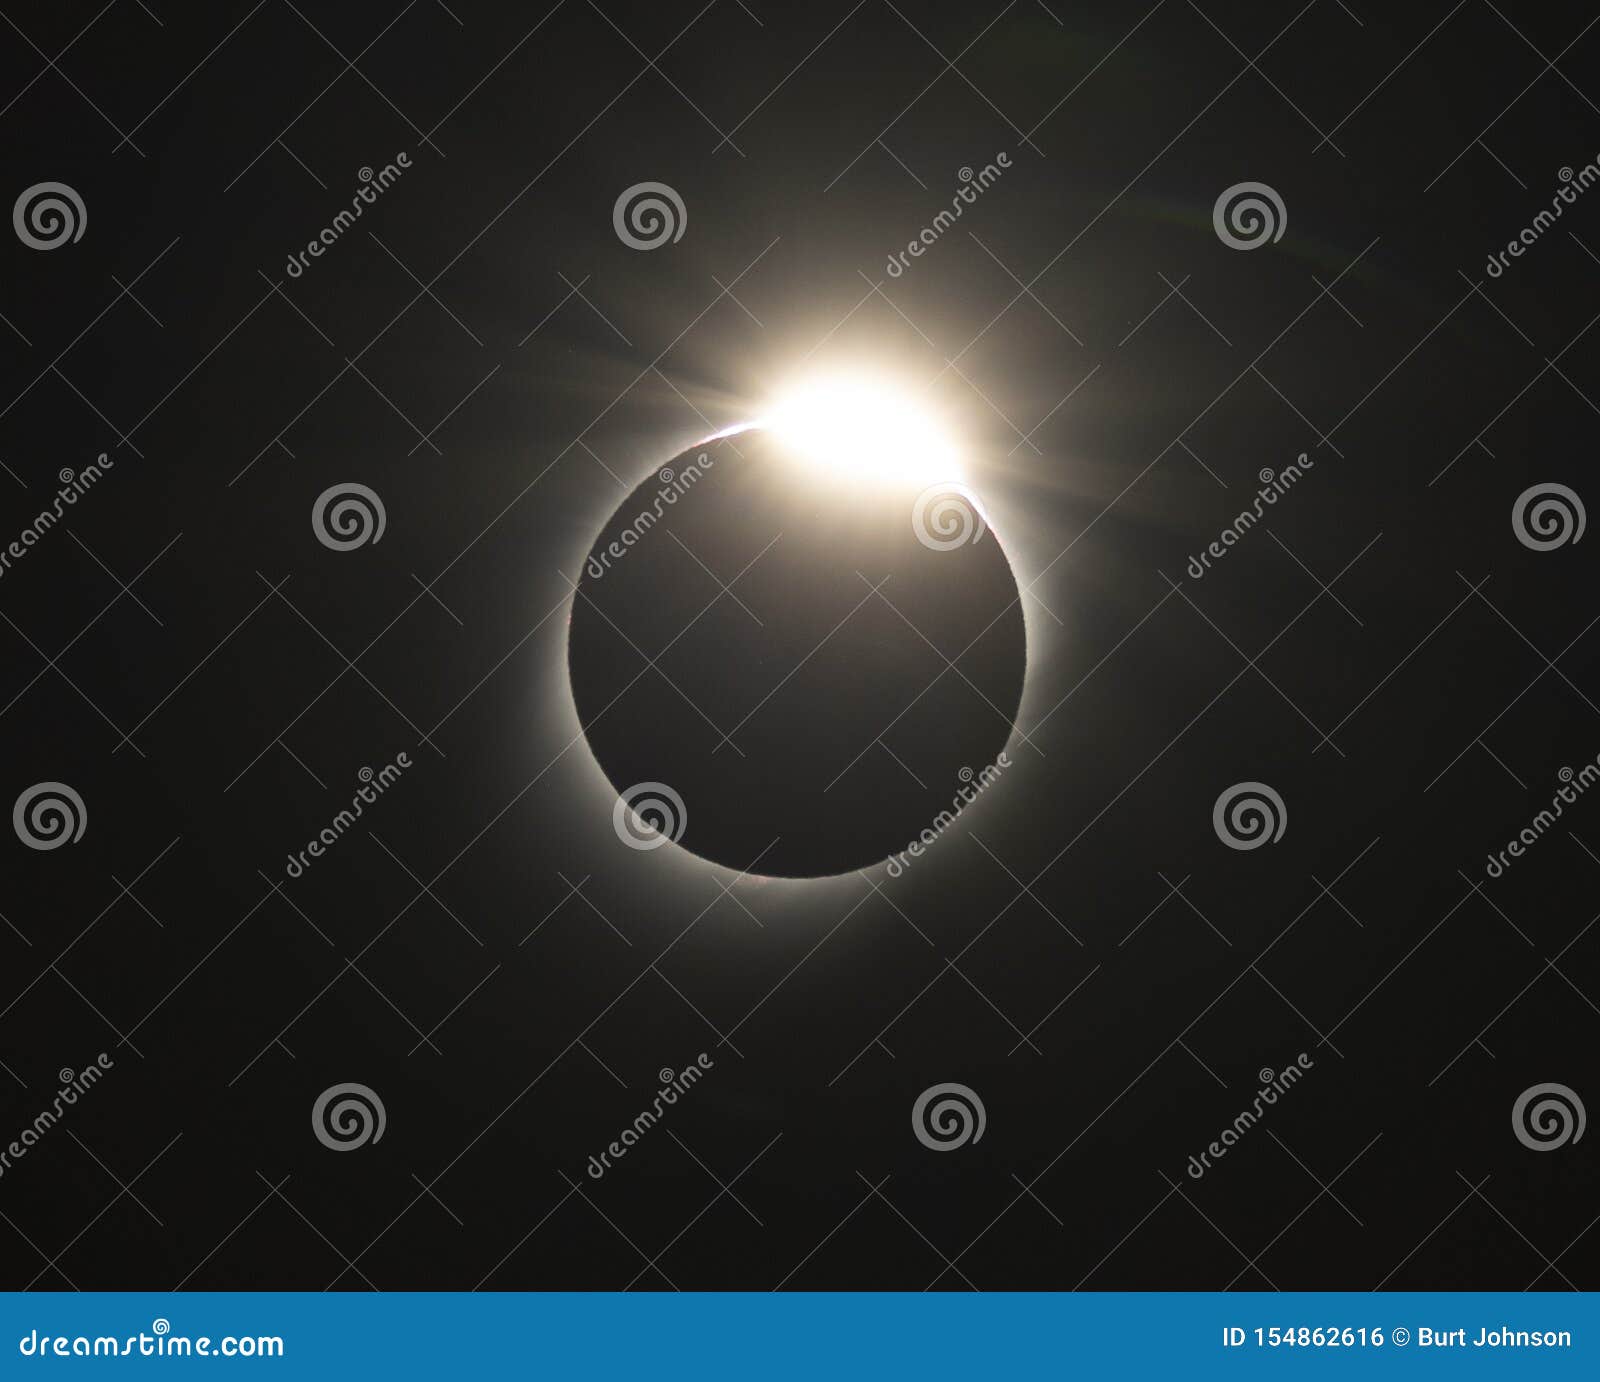 solar eclipse seconds before totality seen from vacuna chile on july 2, 2019